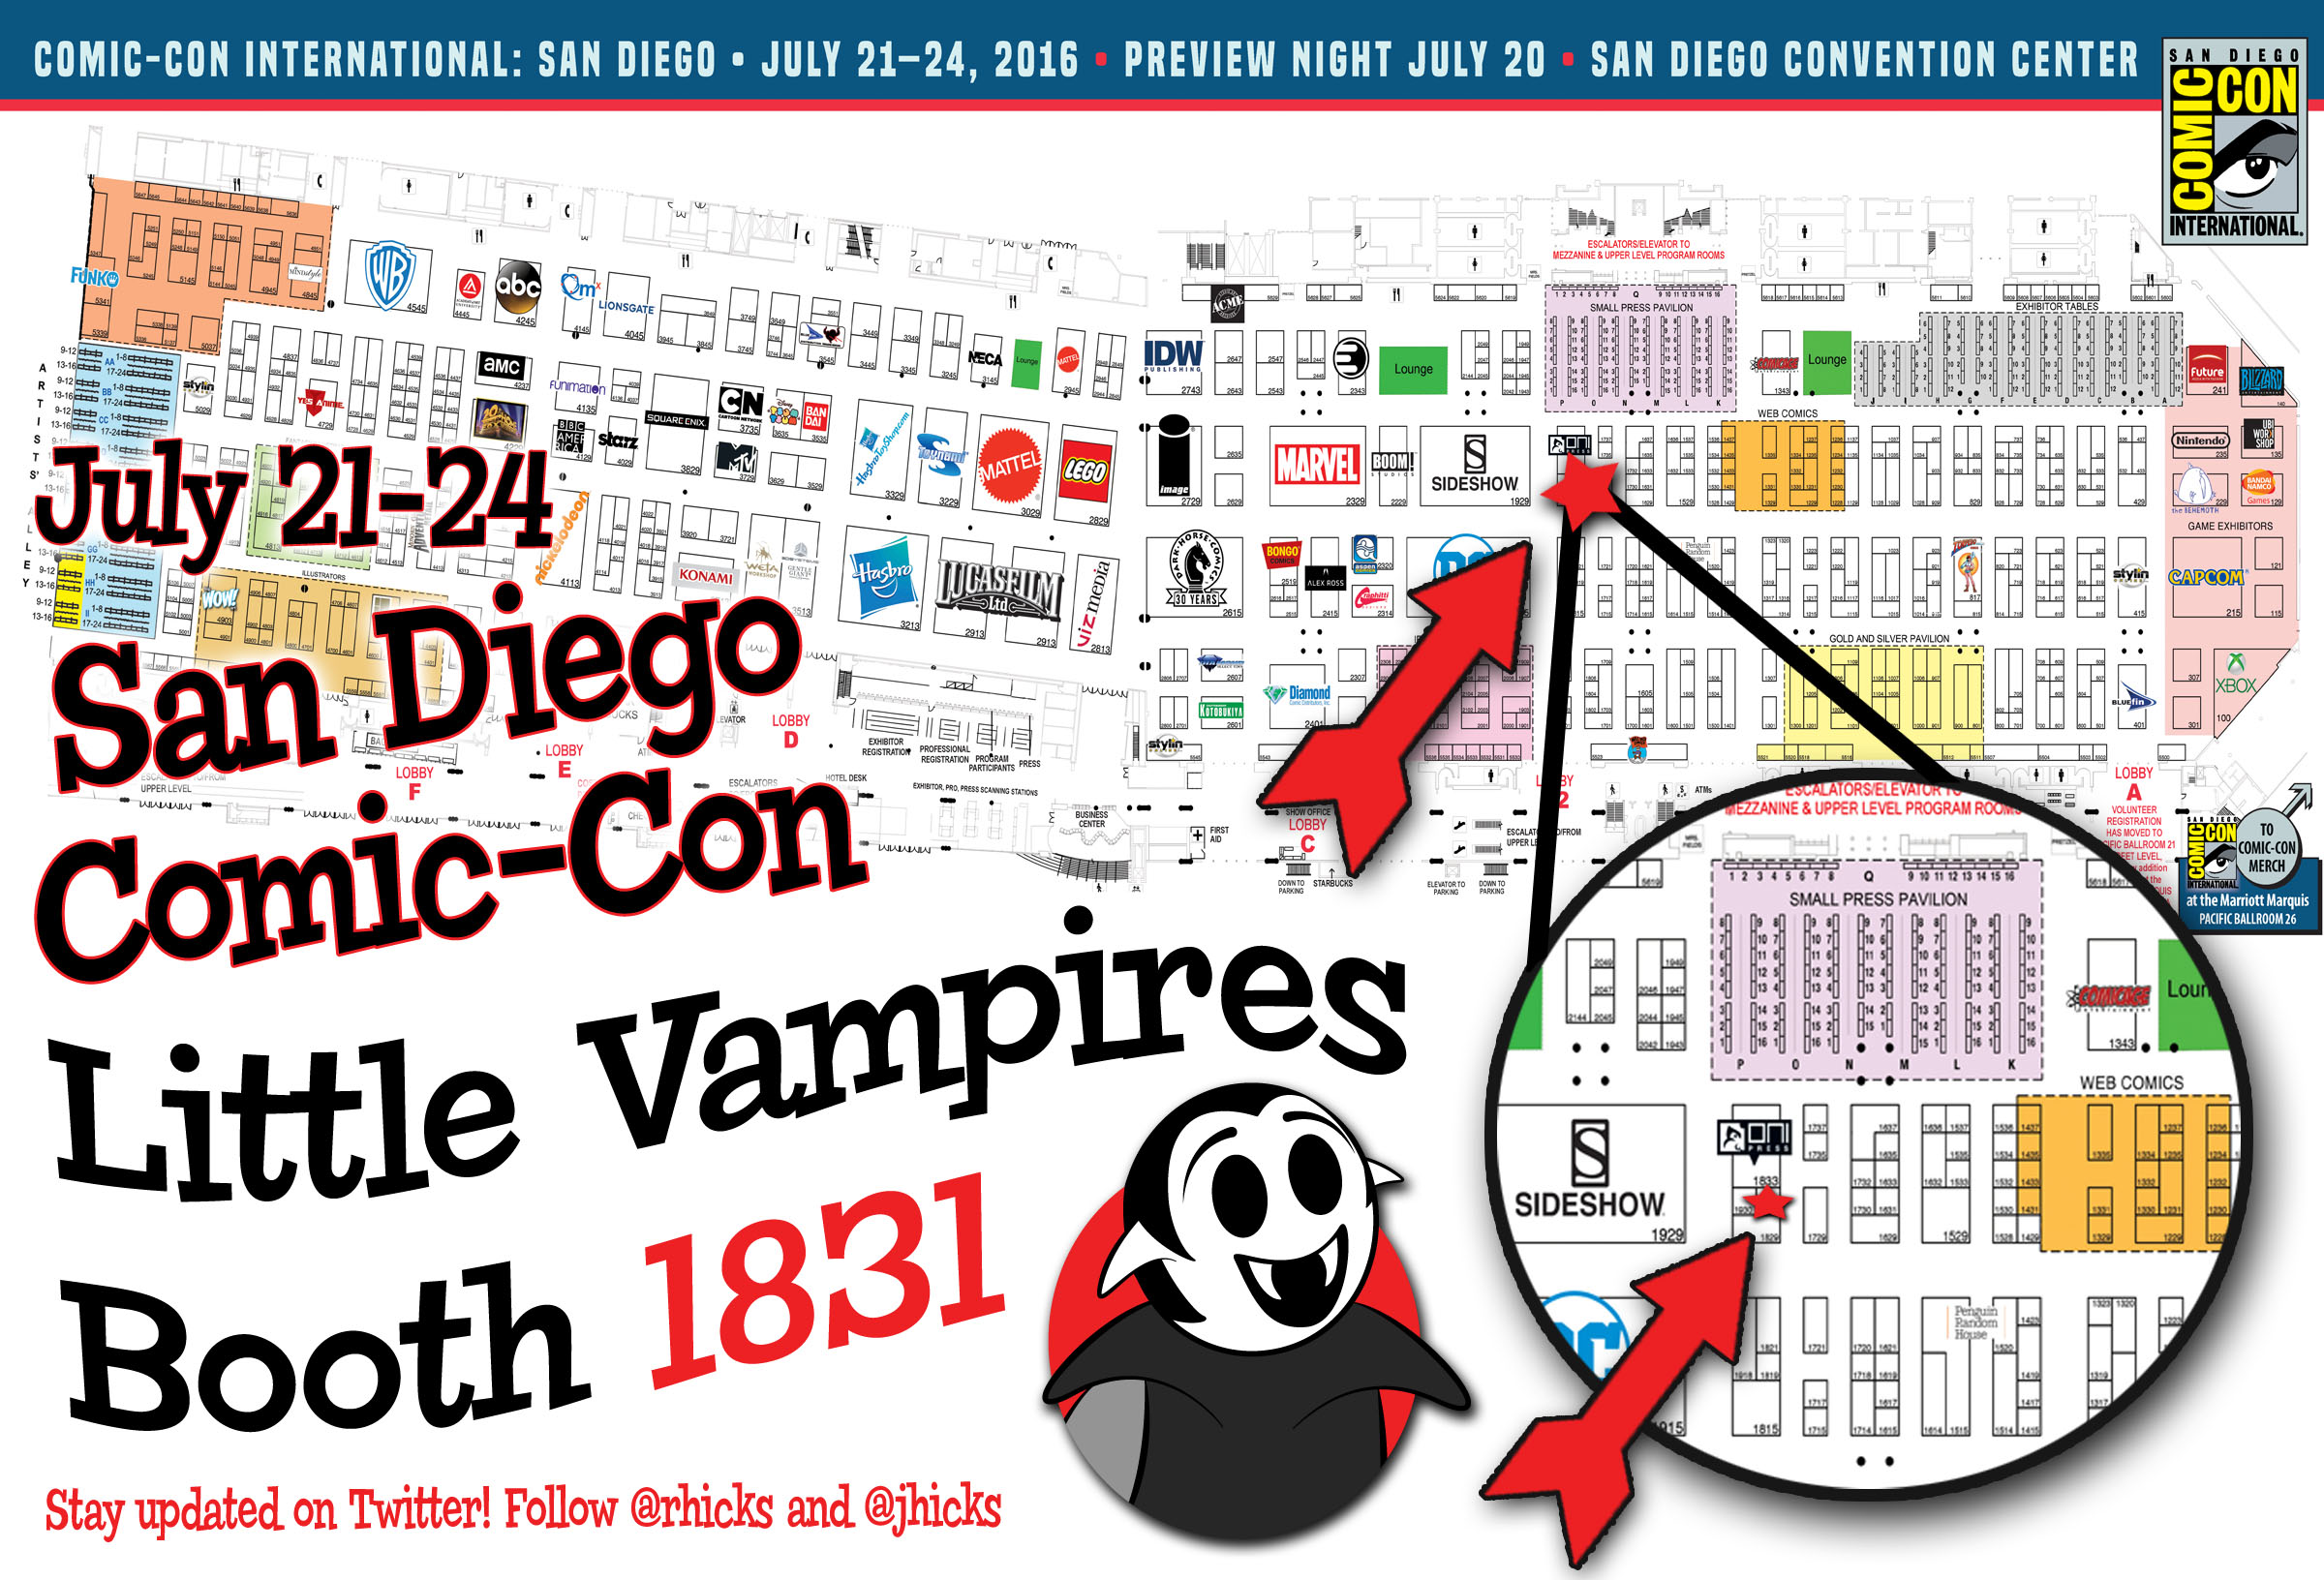 San Diego Comic-Con 2016 exhibitor floor map with the Little Vampires booth highlighted